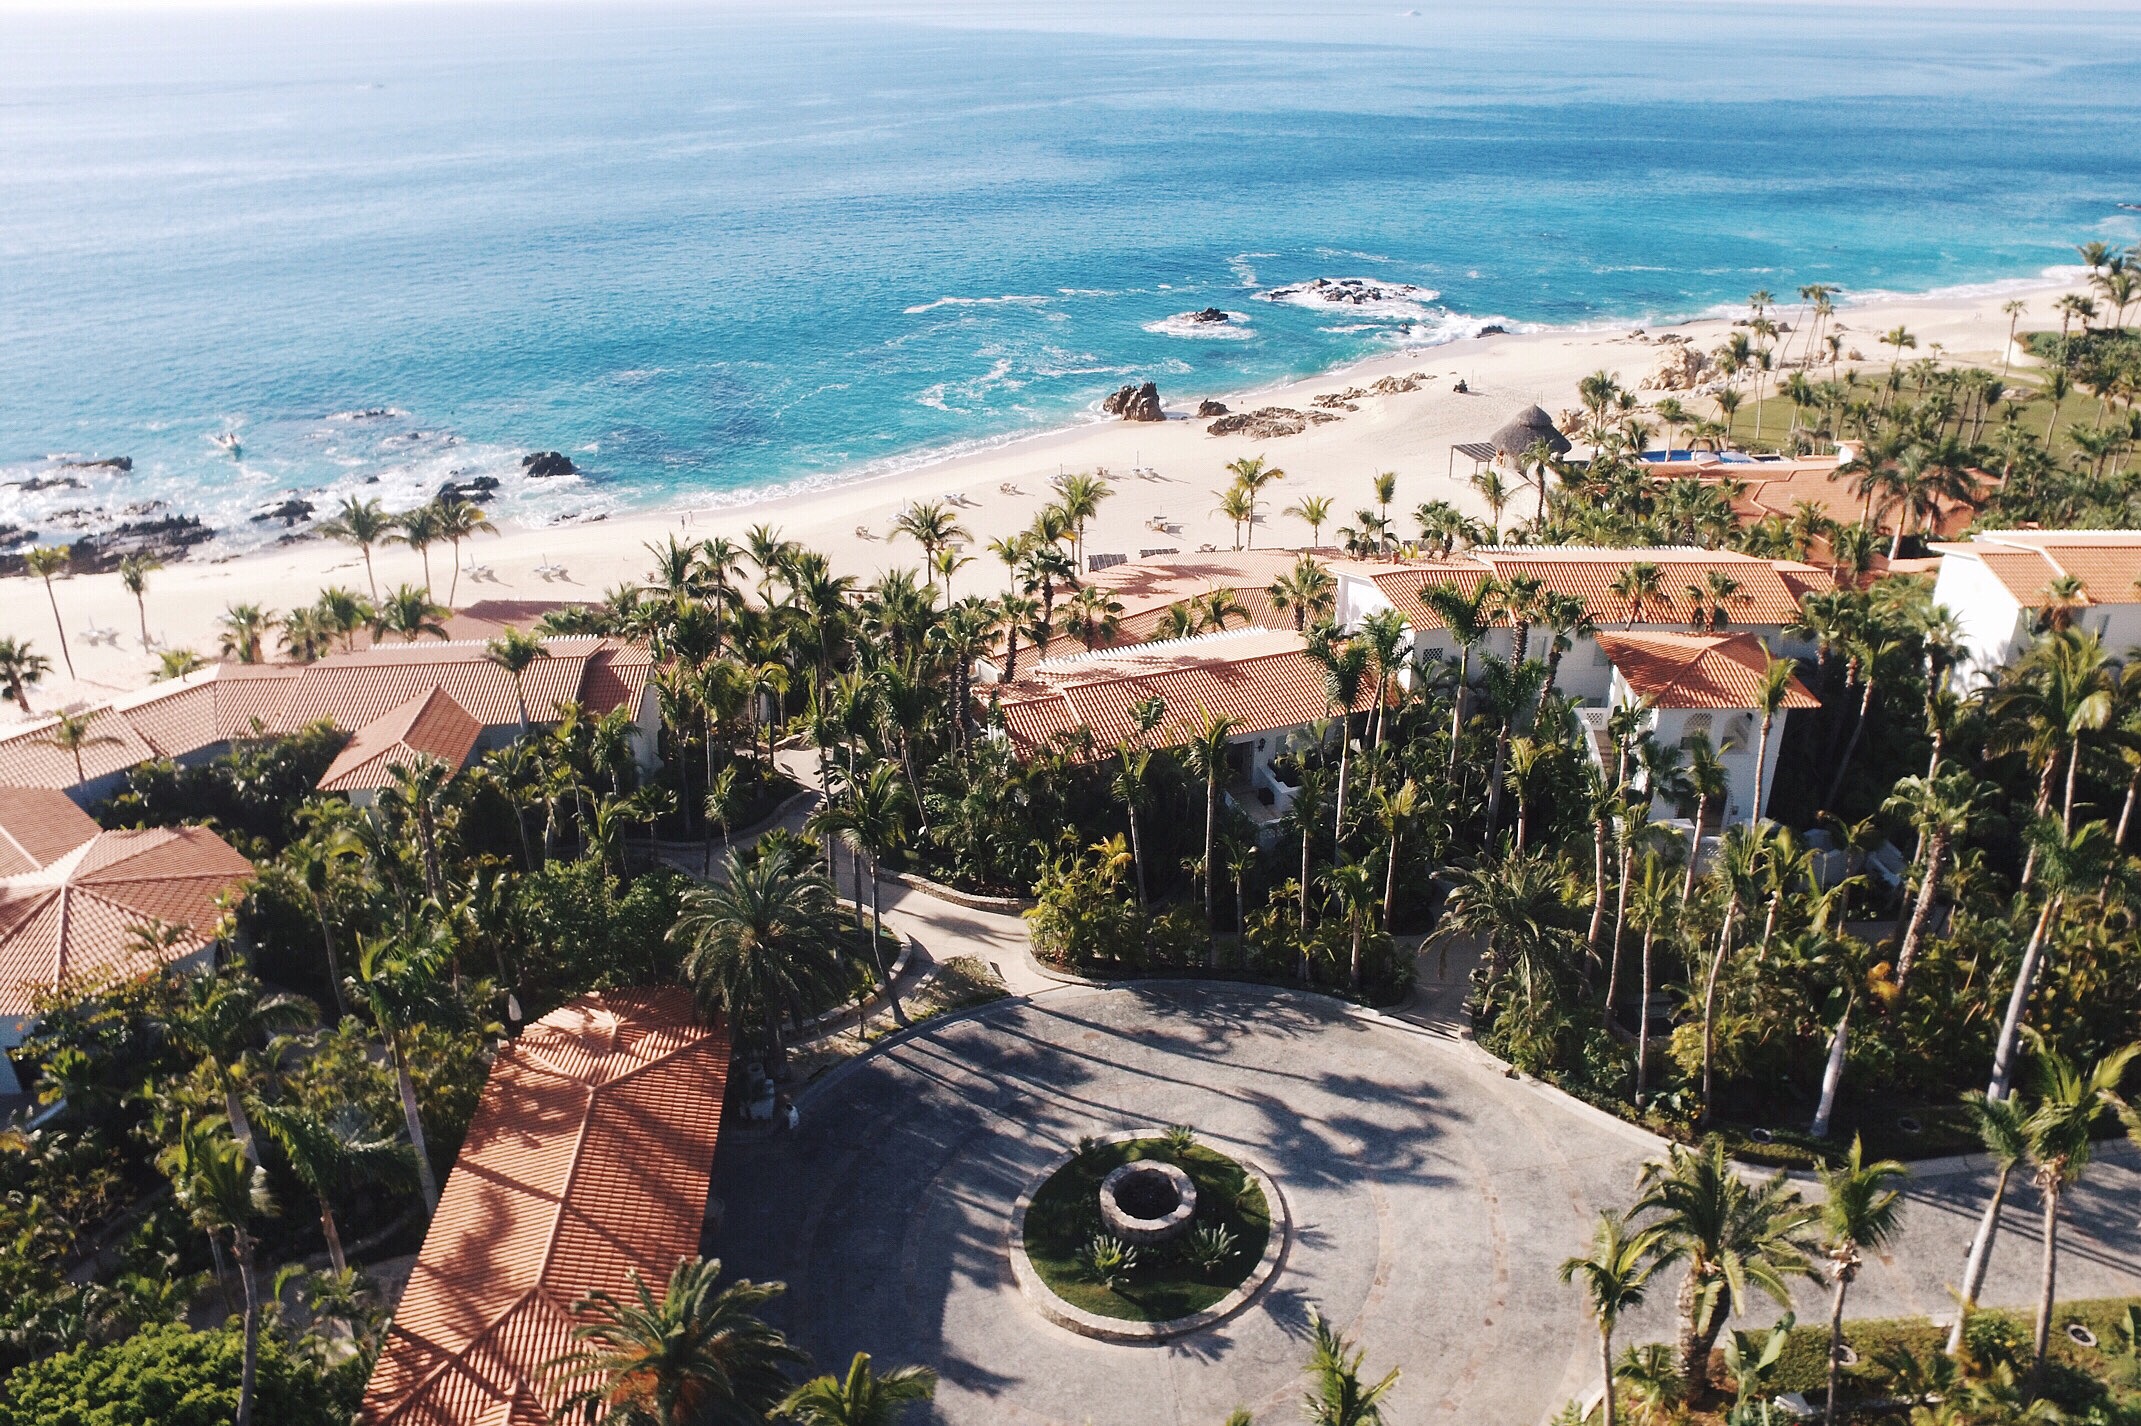 Aerial shot of the One and Only Palmilla in Cabo, Mexico taken on a drone.